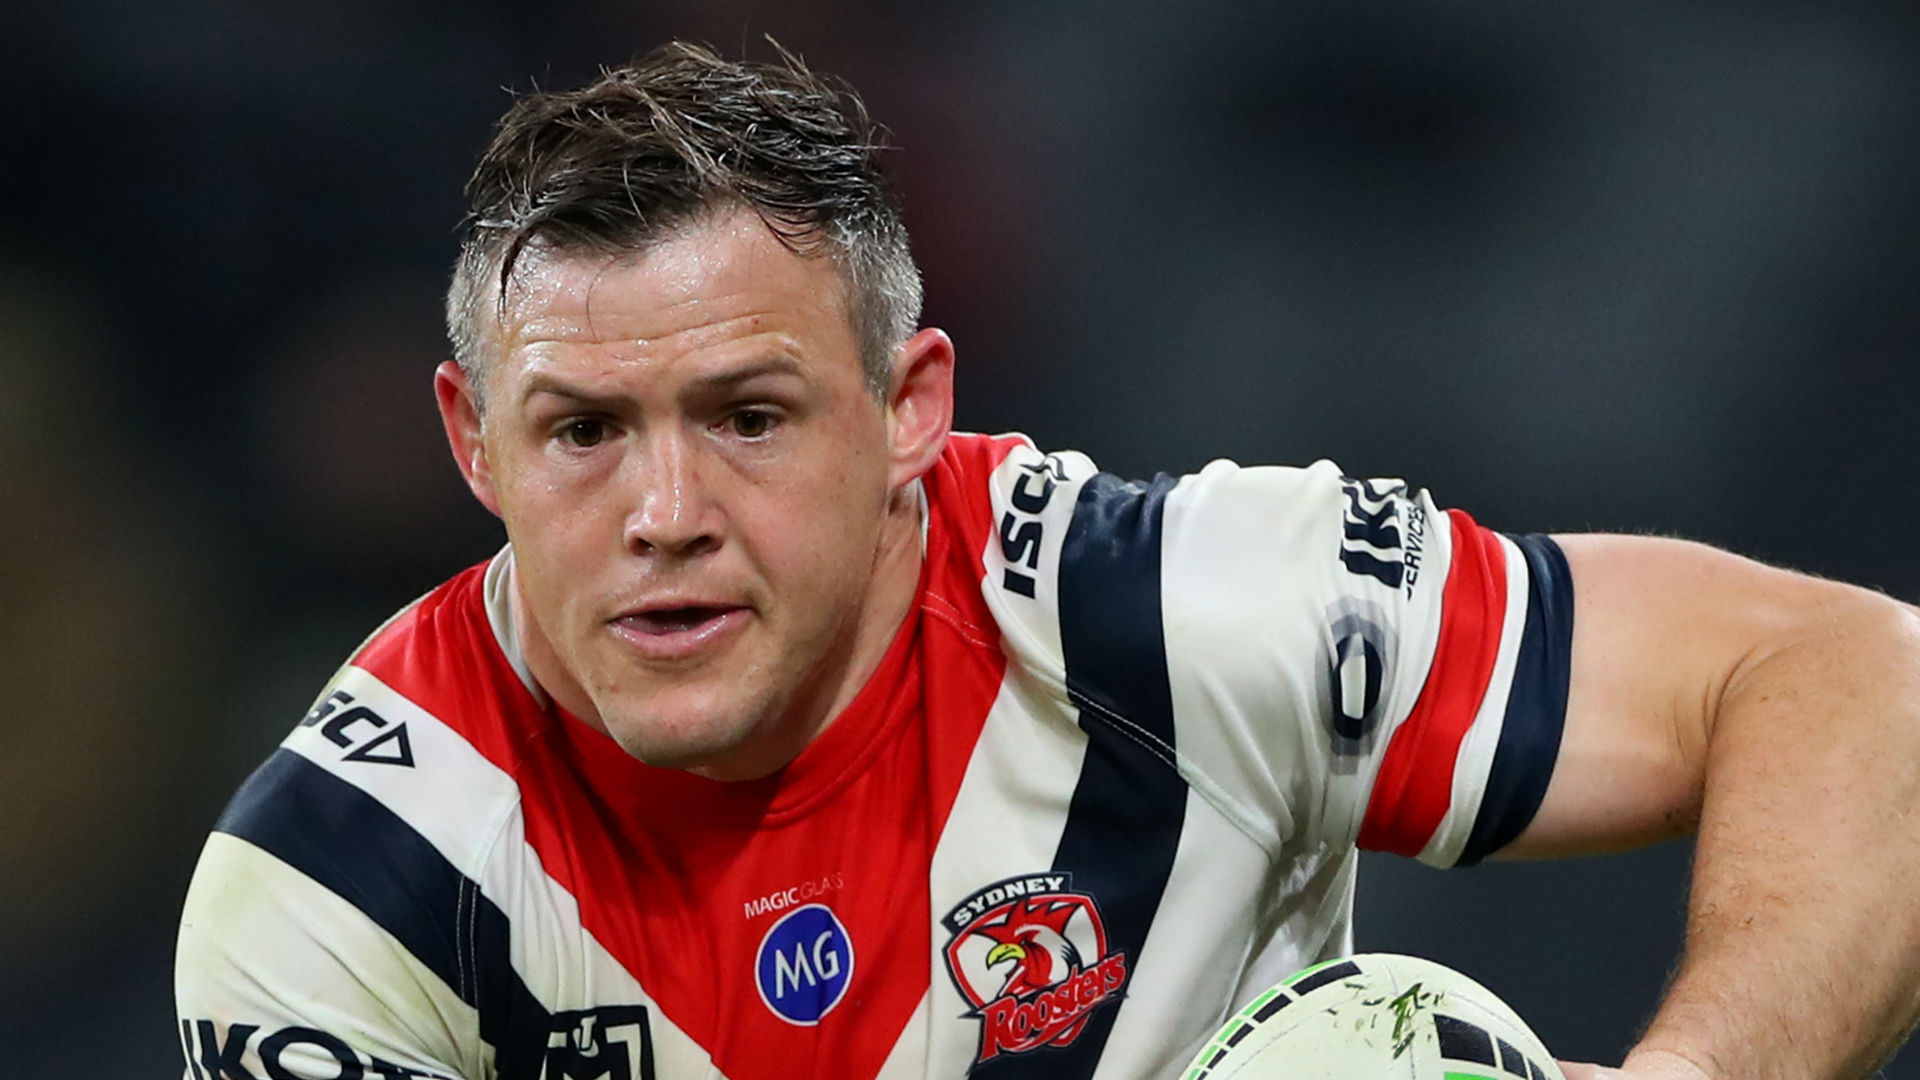 Sydney Roosters and South Sydney Rabbitohs meet in the first NRL Finals match, with Brett Morris set to make his 250th league appearance.